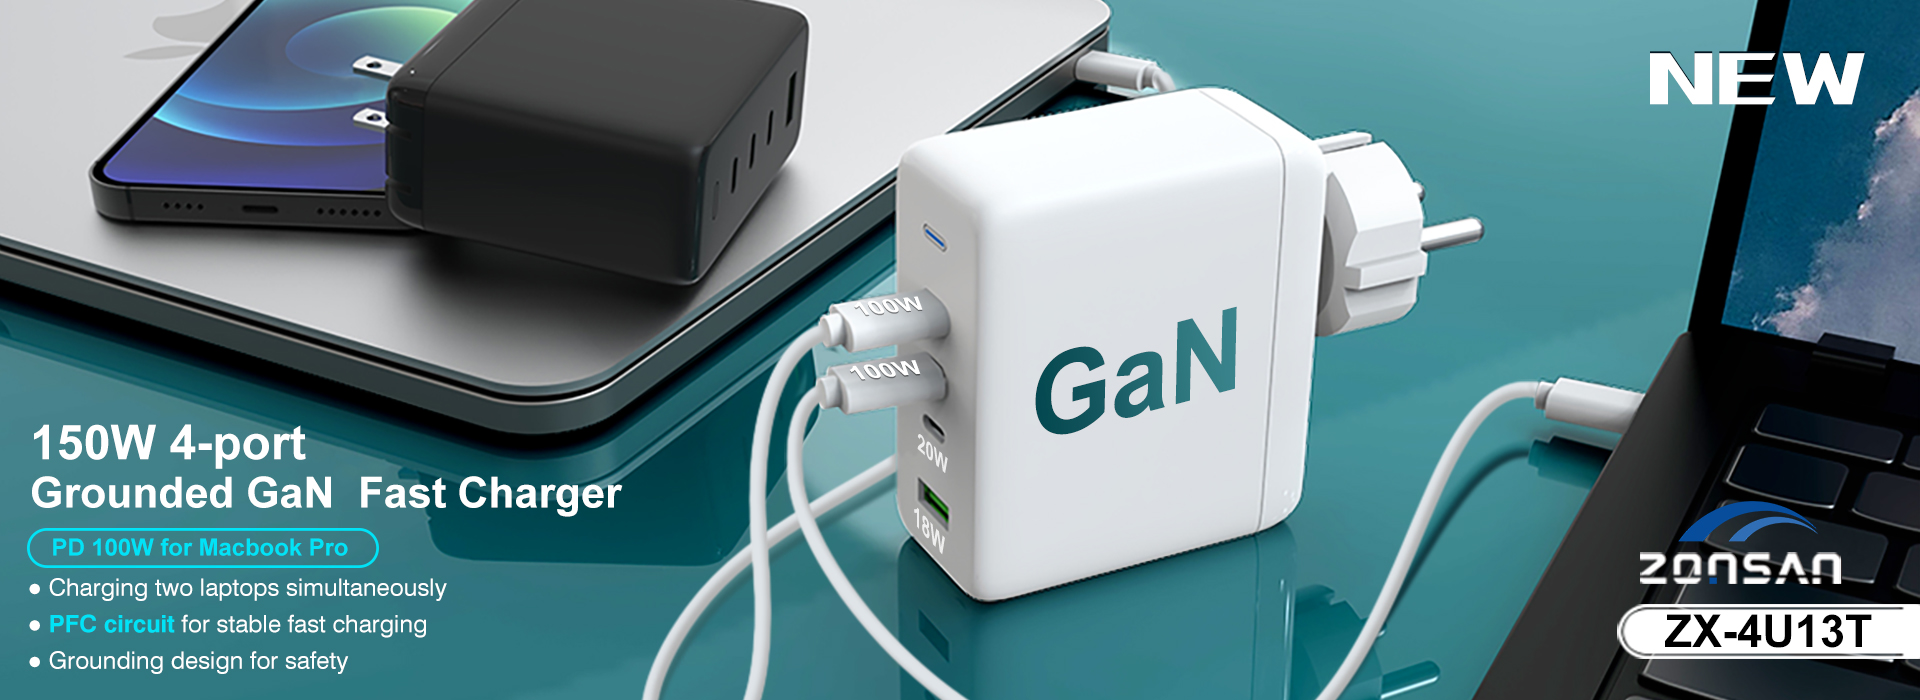 150W 4-port  Grounded GaN  Fast Charger